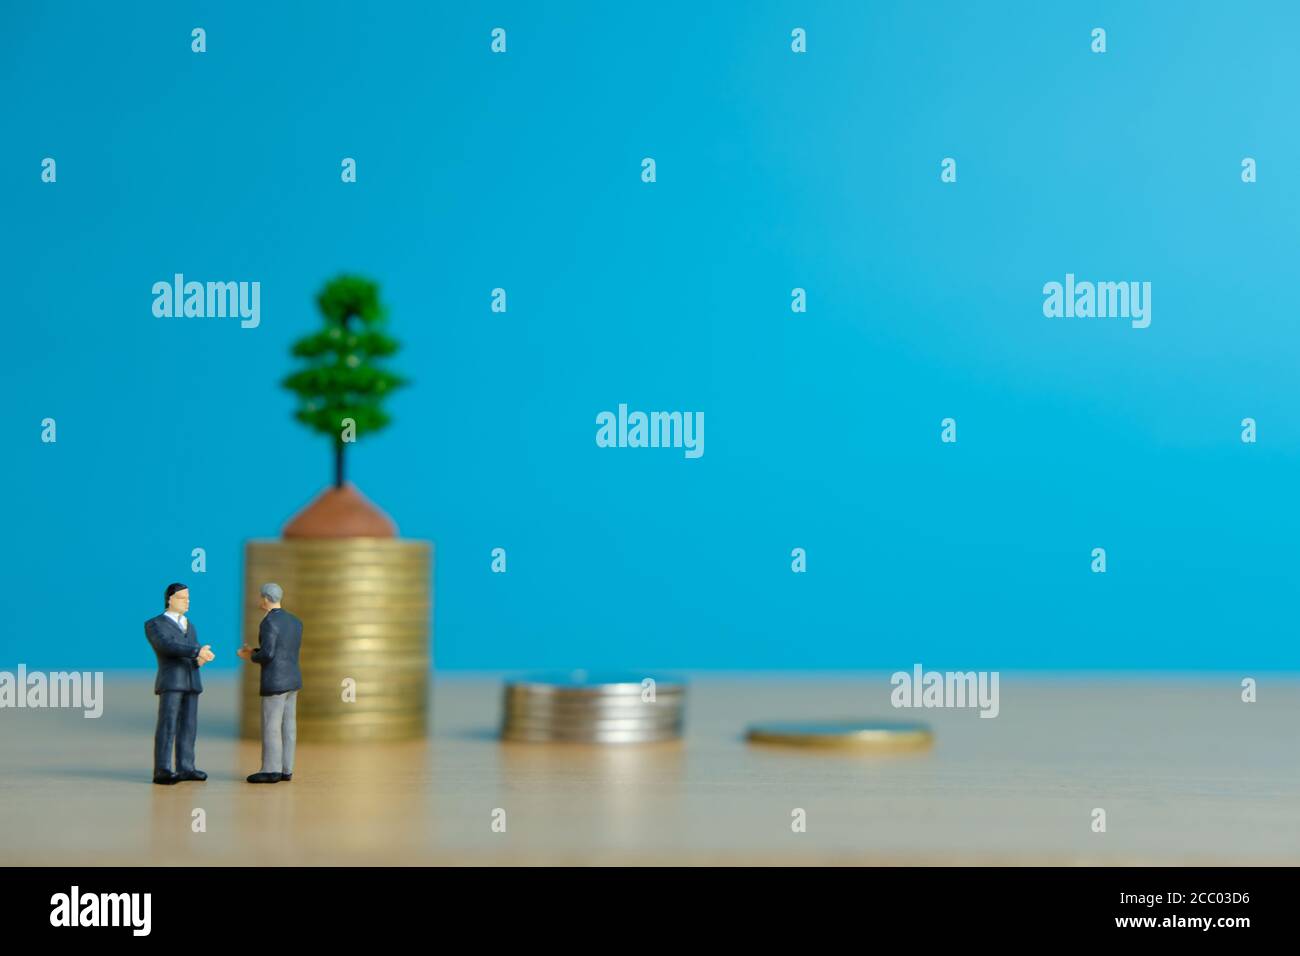 Miniature business concept - two businessman make an handshake for partnership agreement handshake in front of coin stack Stock Photo